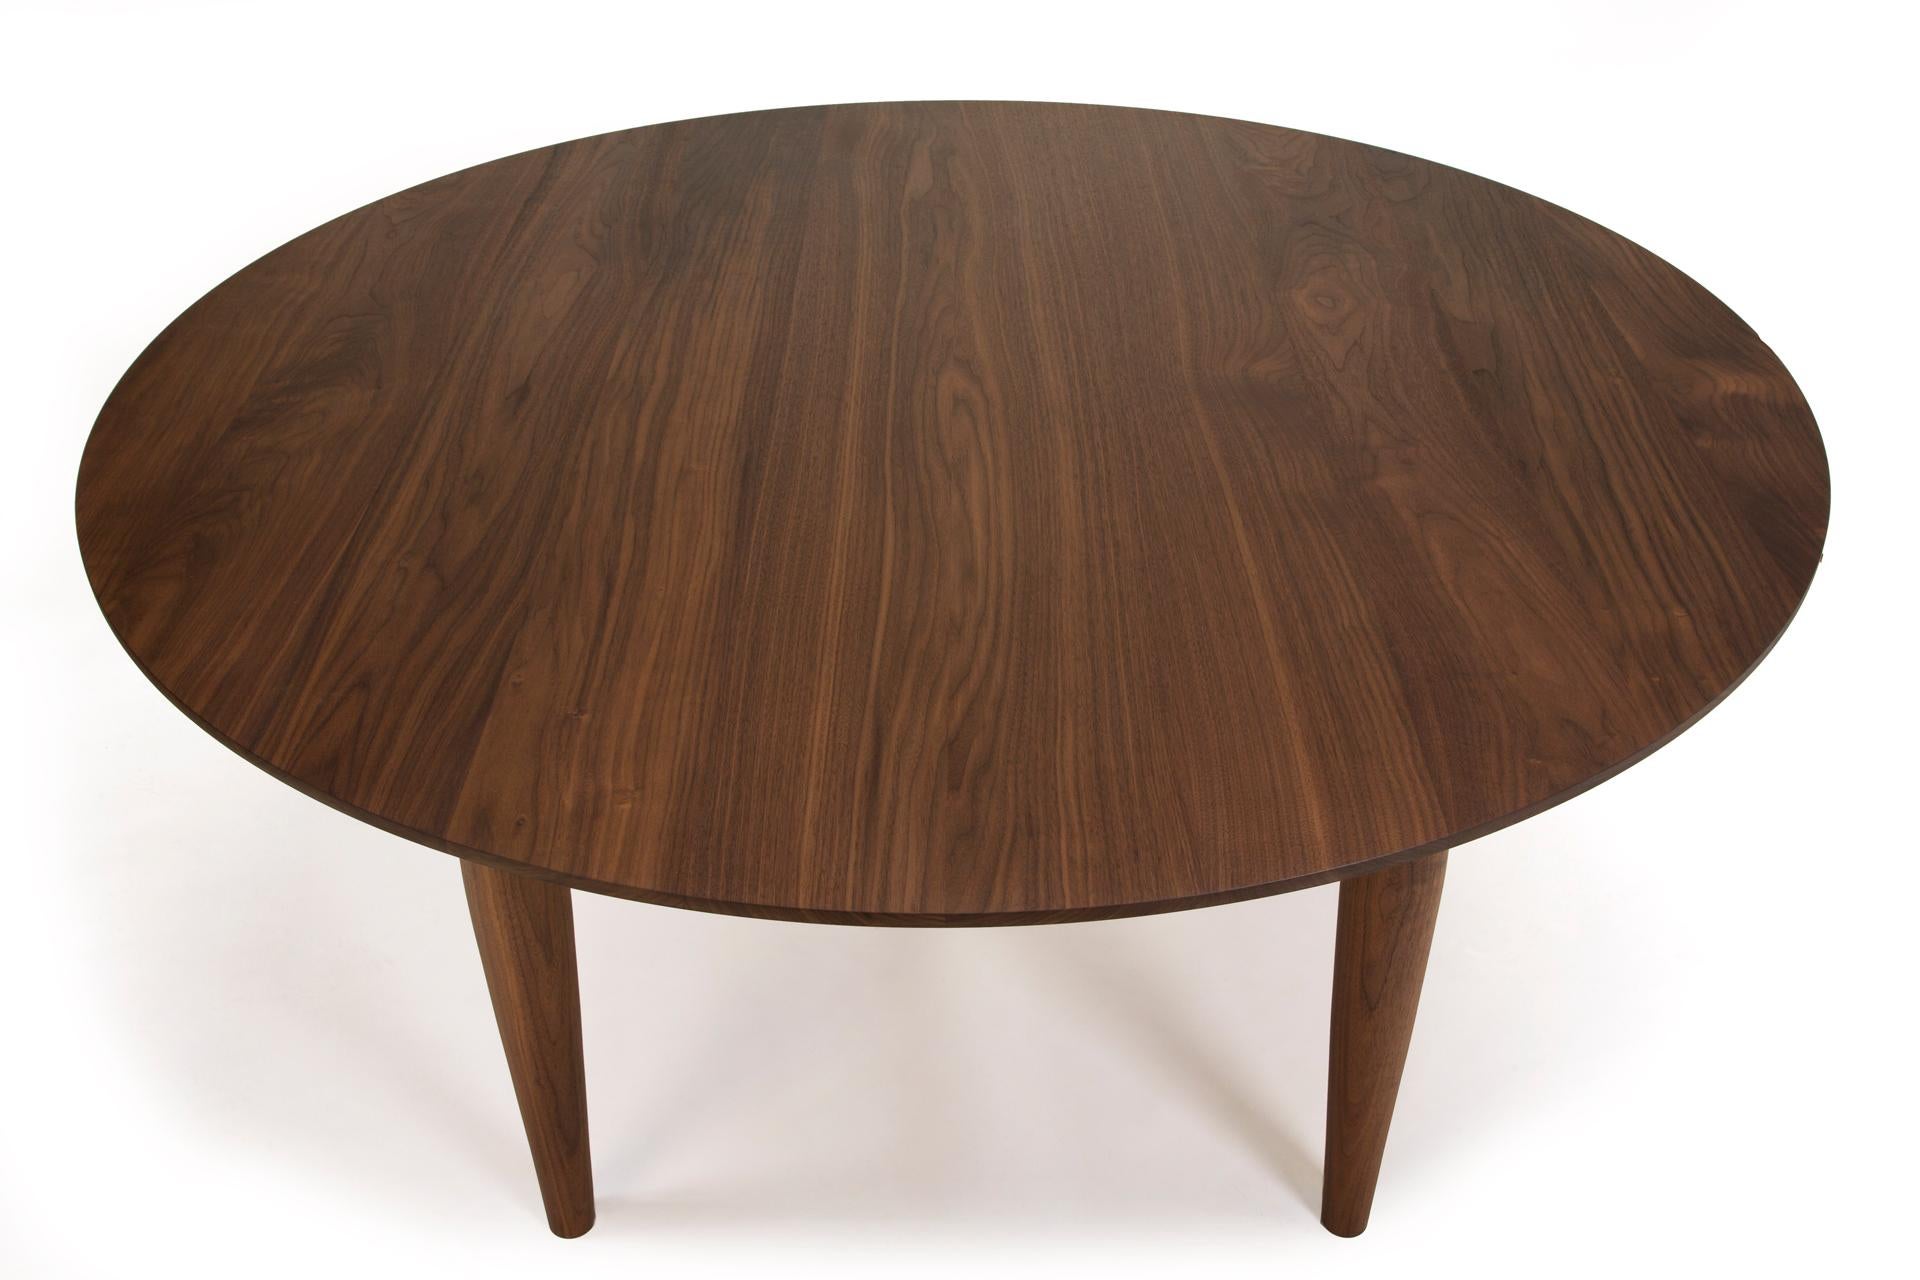 Hand-Crafted Modern Dining Table in Walnut, by Studio DiPaolo For Sale